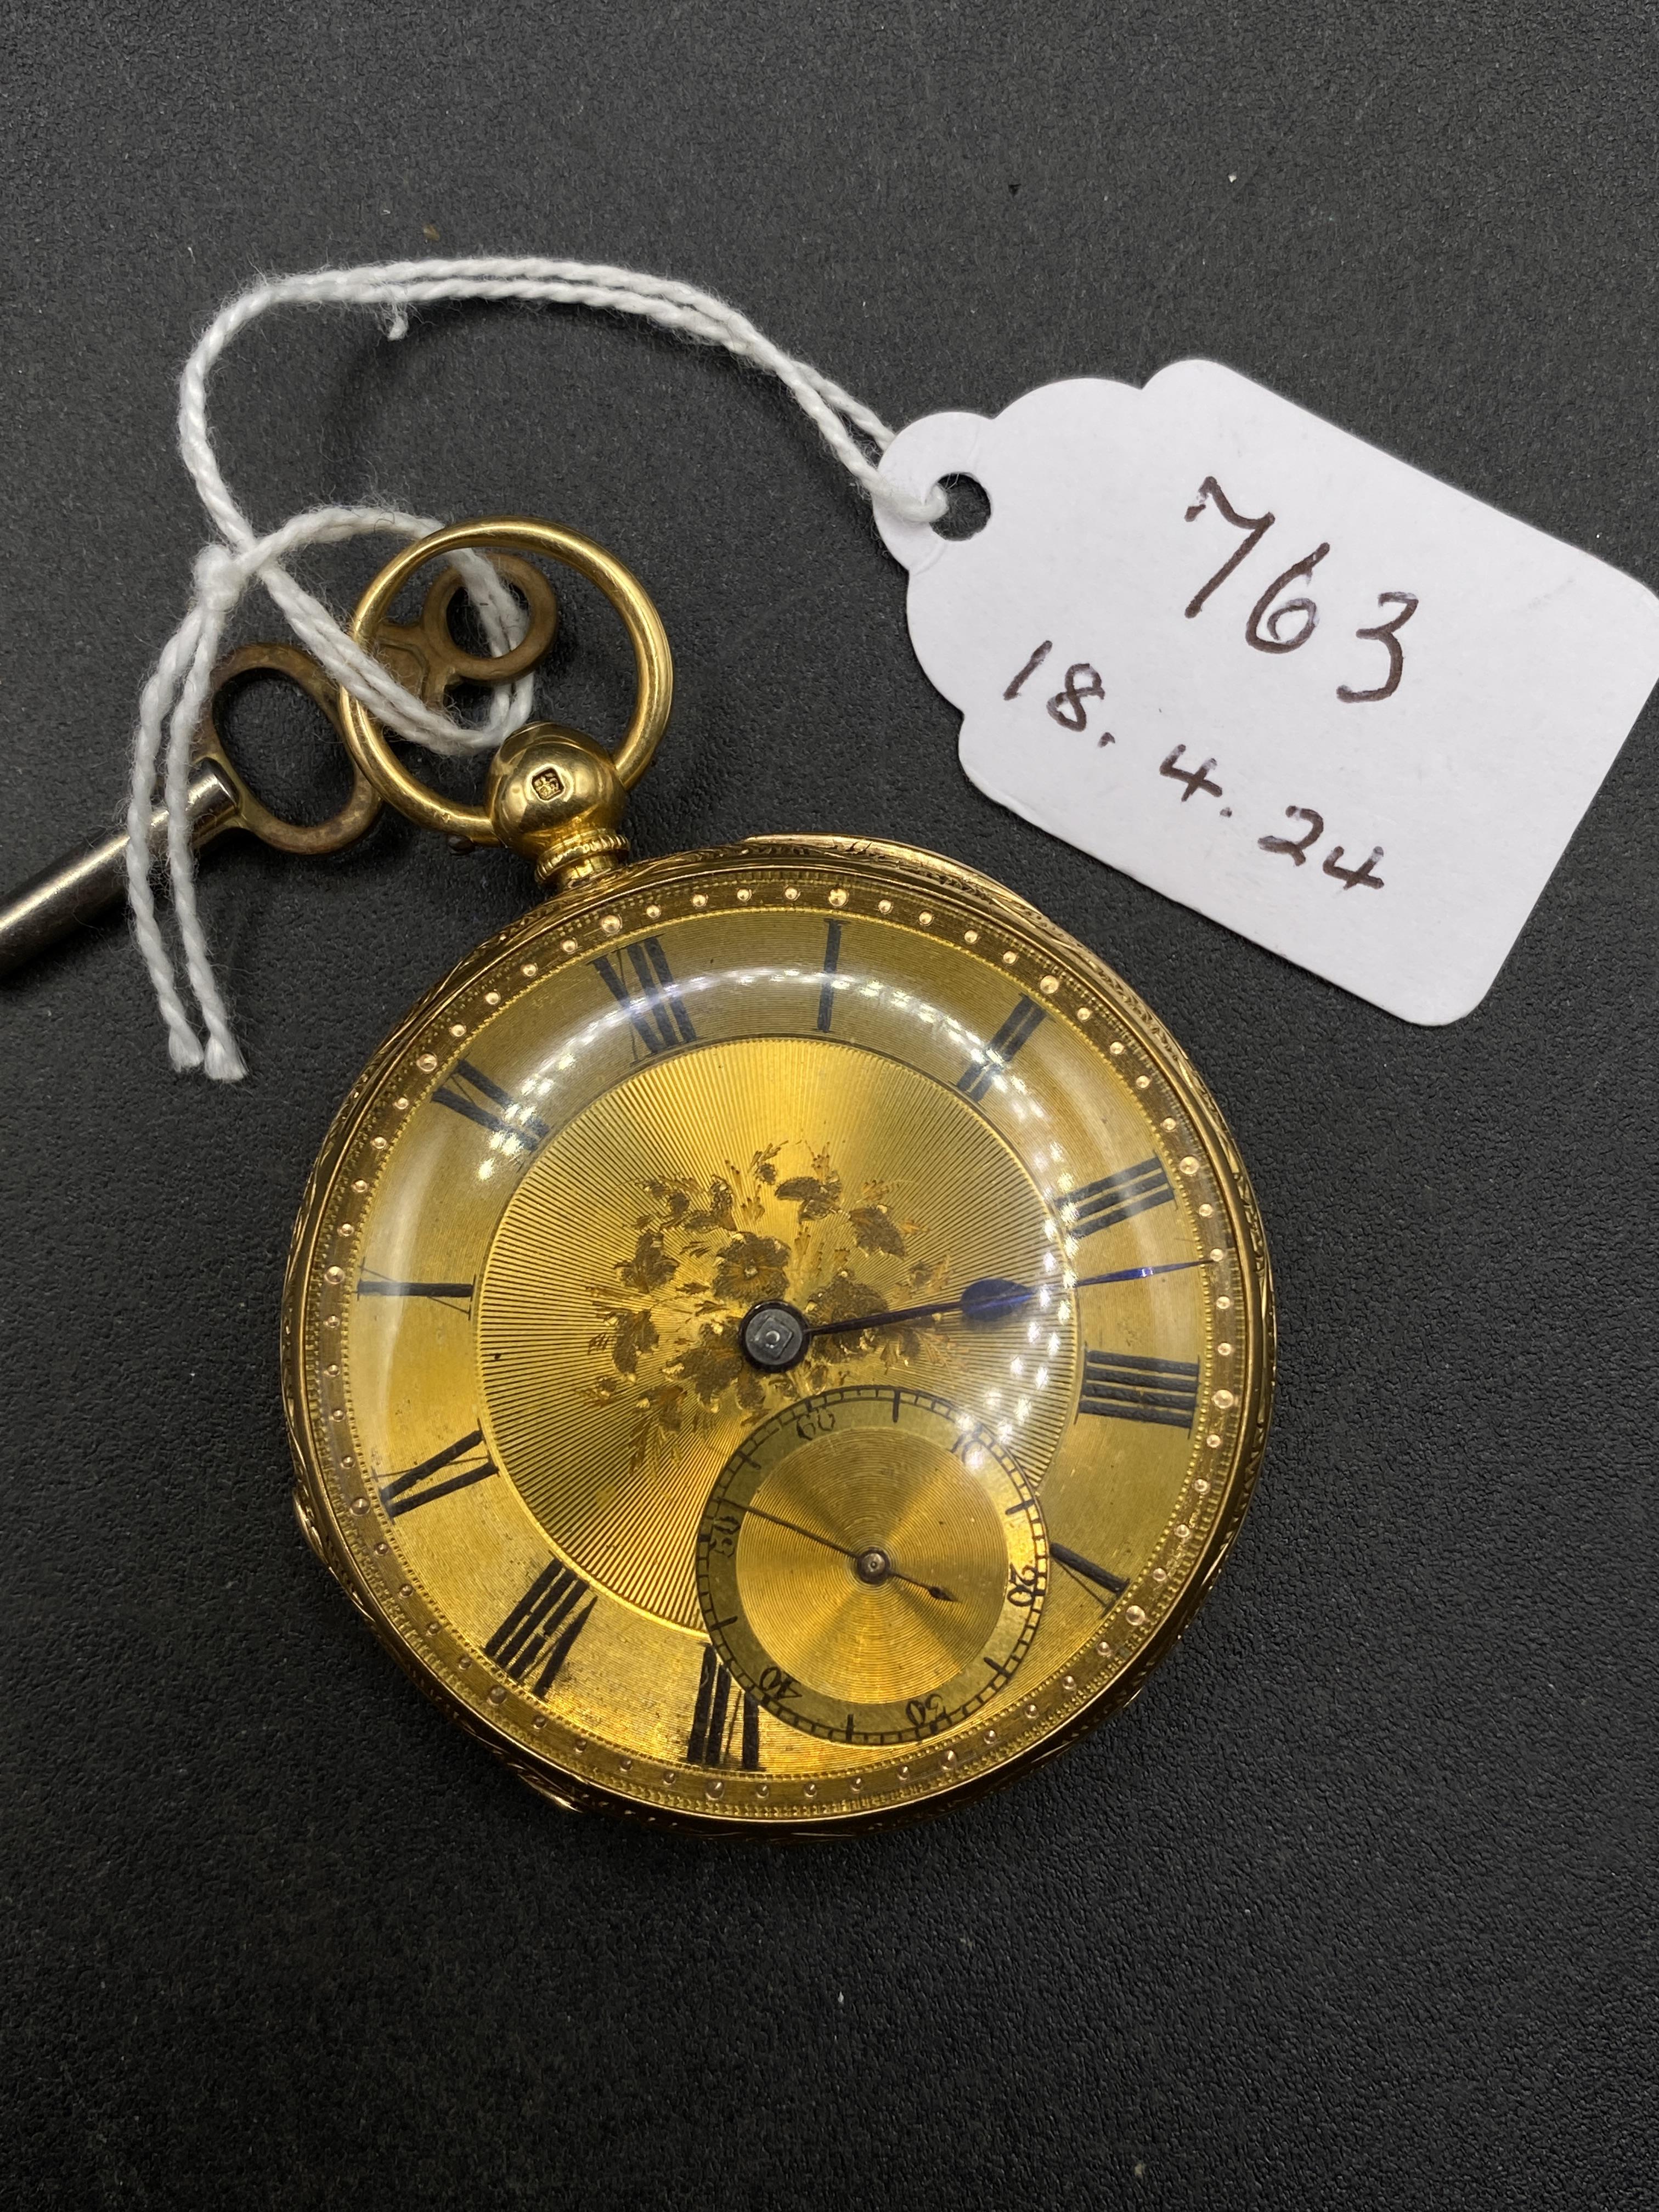 A ATTRACTIVE FLORAL ENGRAVED GENTS POCKET WATCH 18CT GOLD WITH GOLD COLOURED FACE SECONDS SWEEP